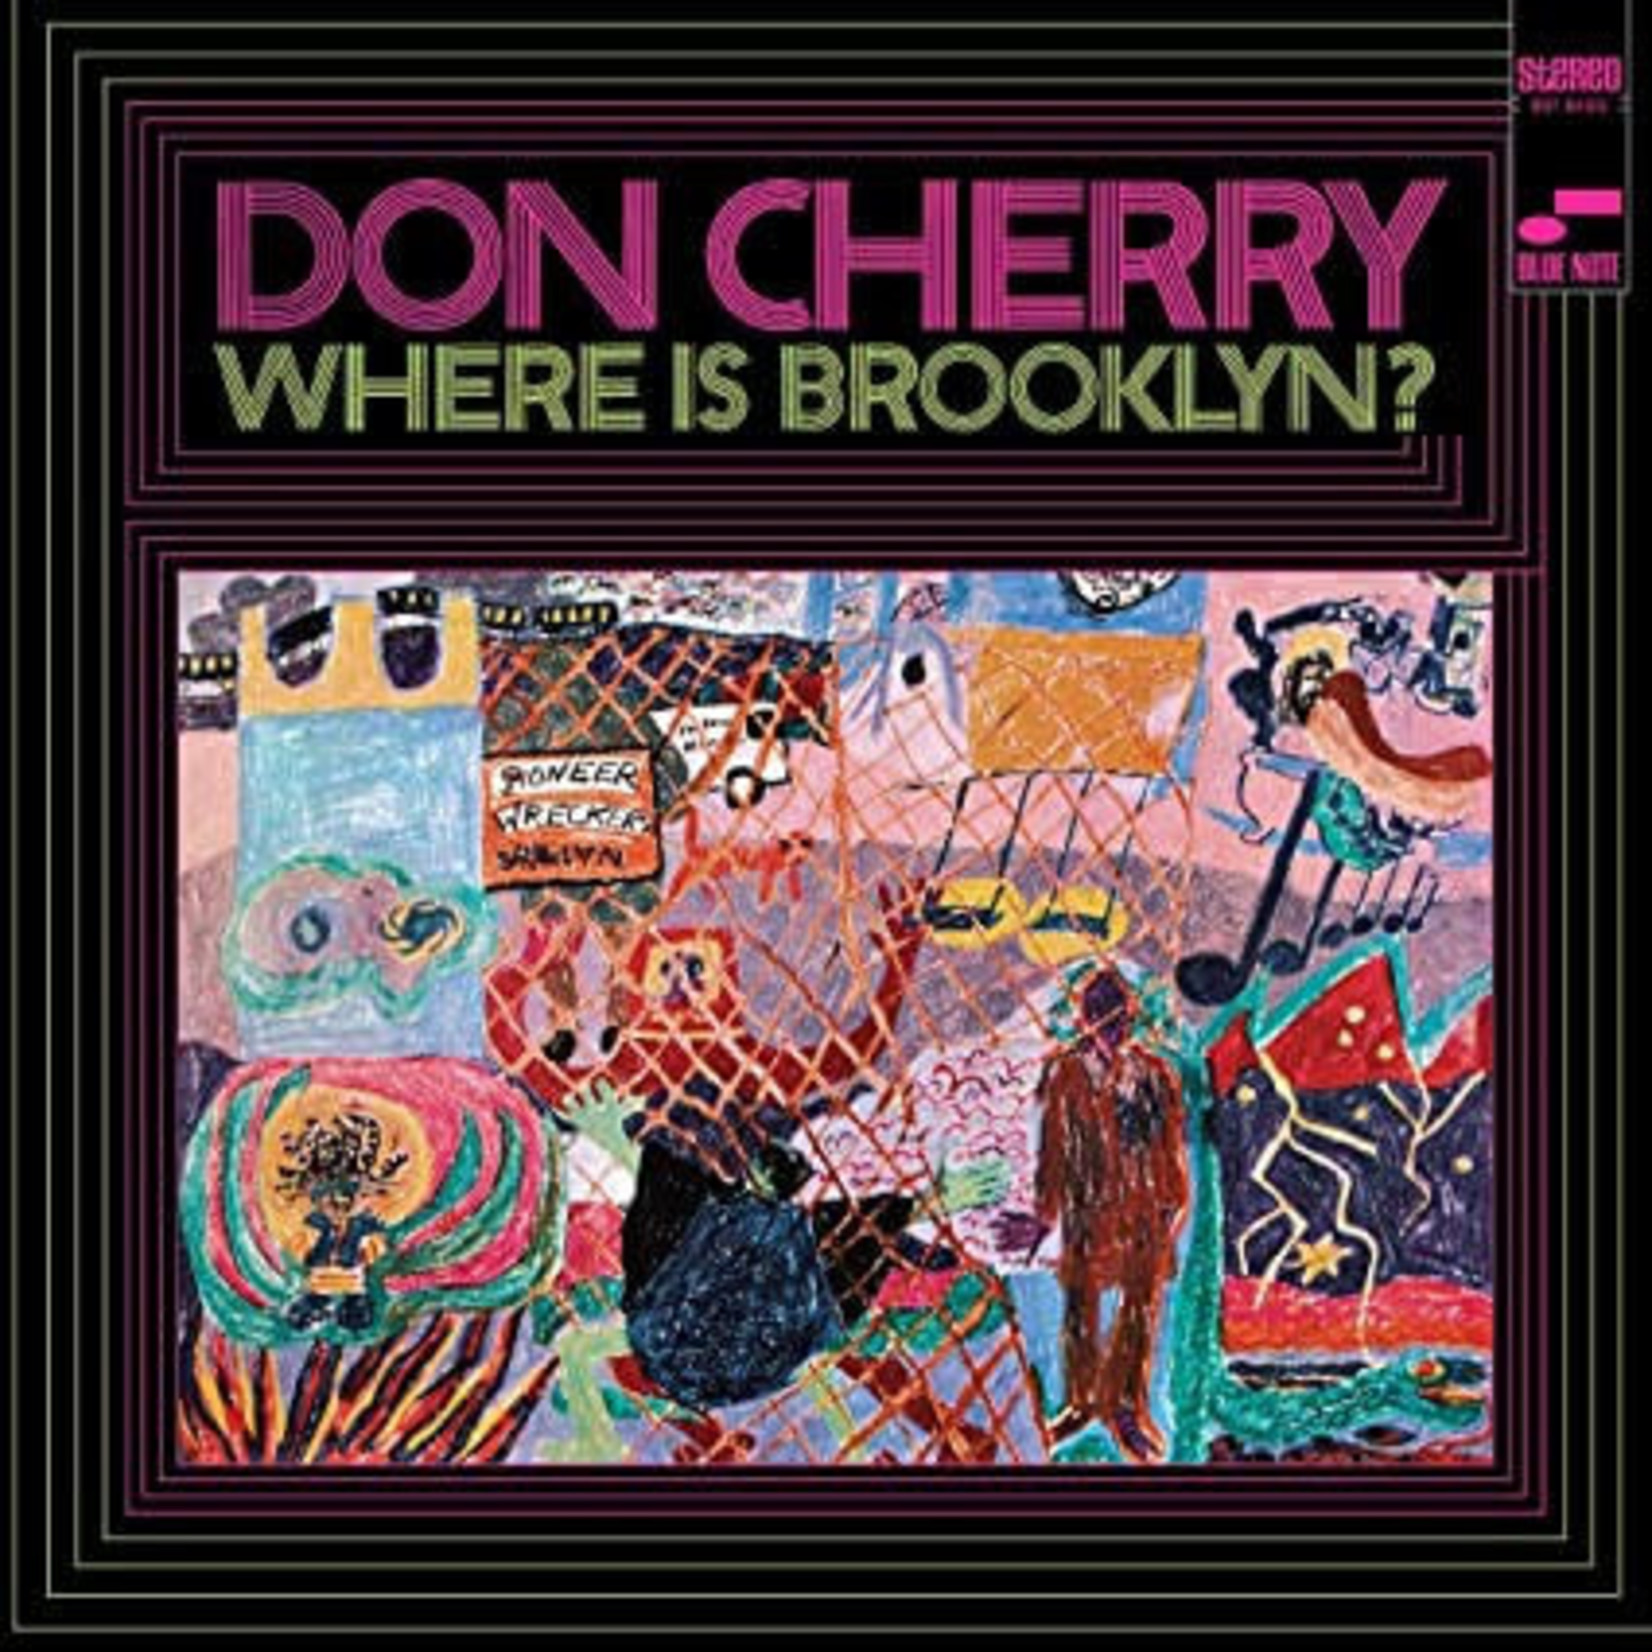 Blue Note Don Cherry - Where is Brooklyn? (LP)